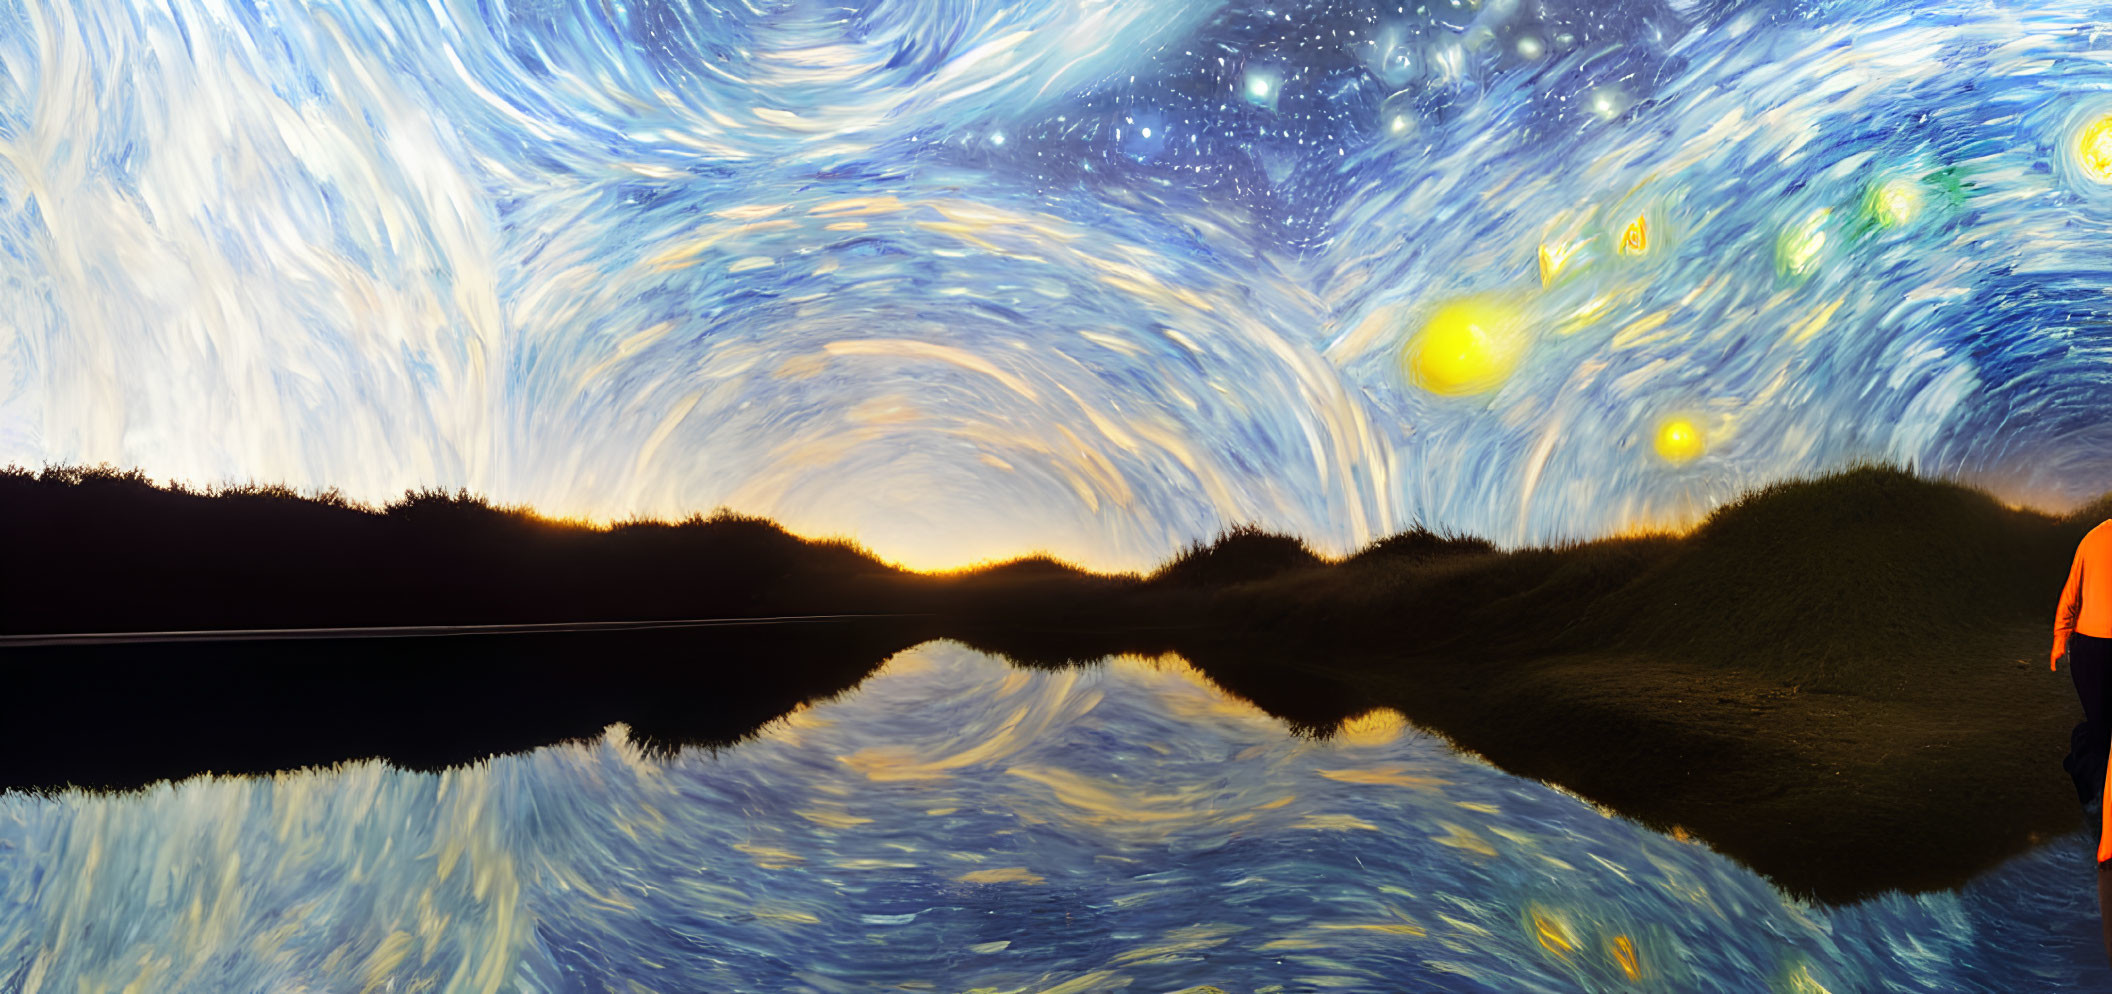 Person standing by calm water under swirling starry sky reminiscent of "Starry Night" painting